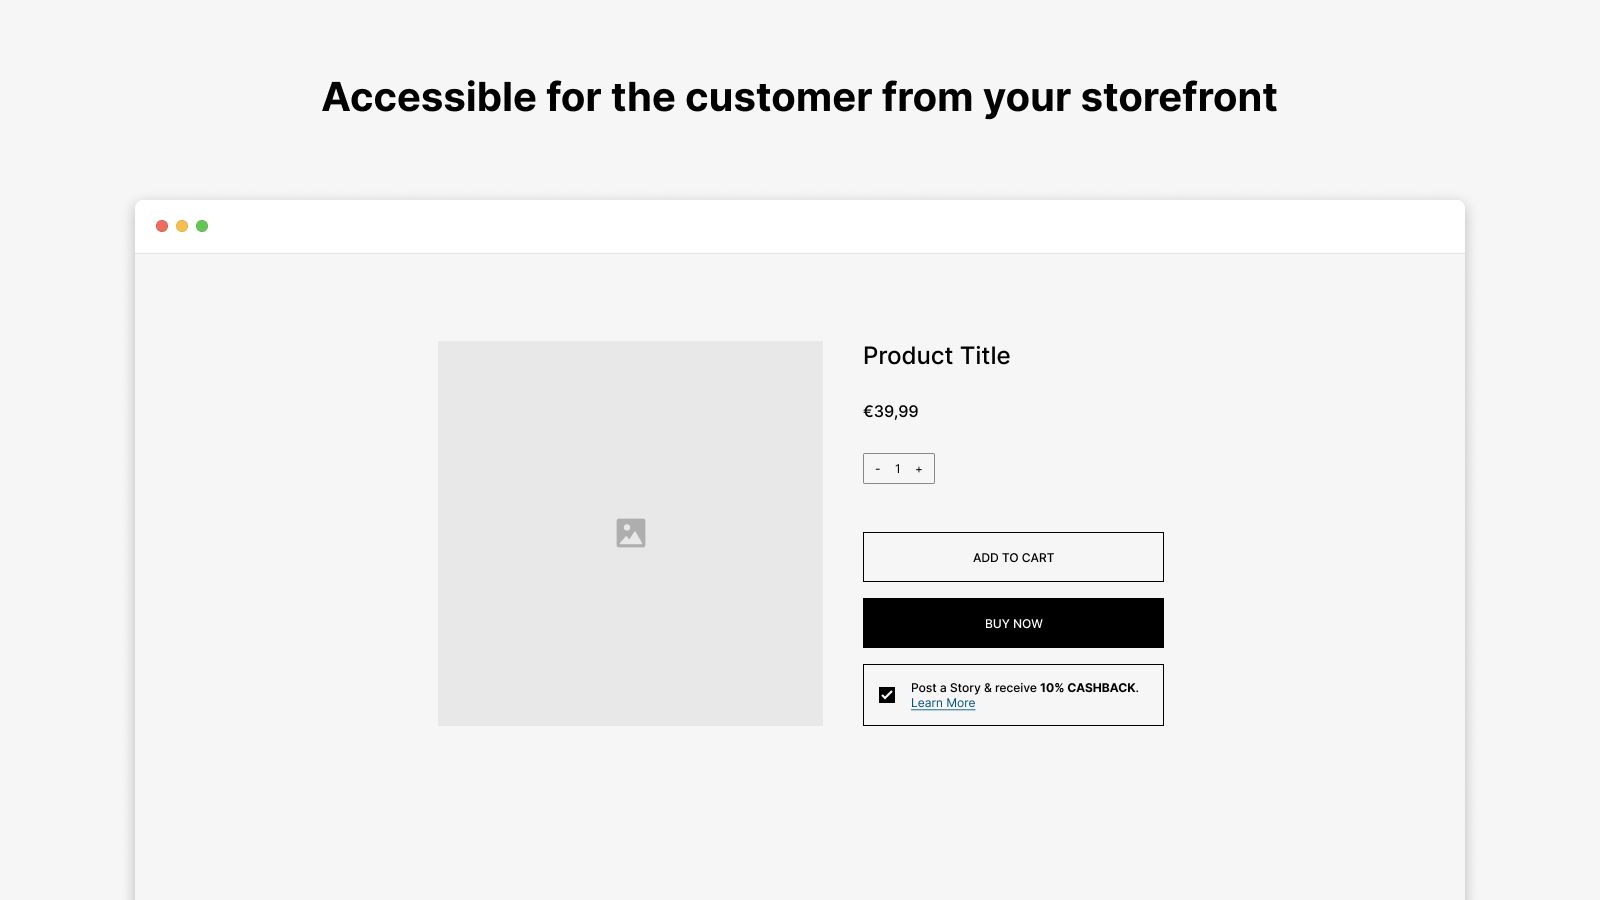 Accessible for the customer from your storefront